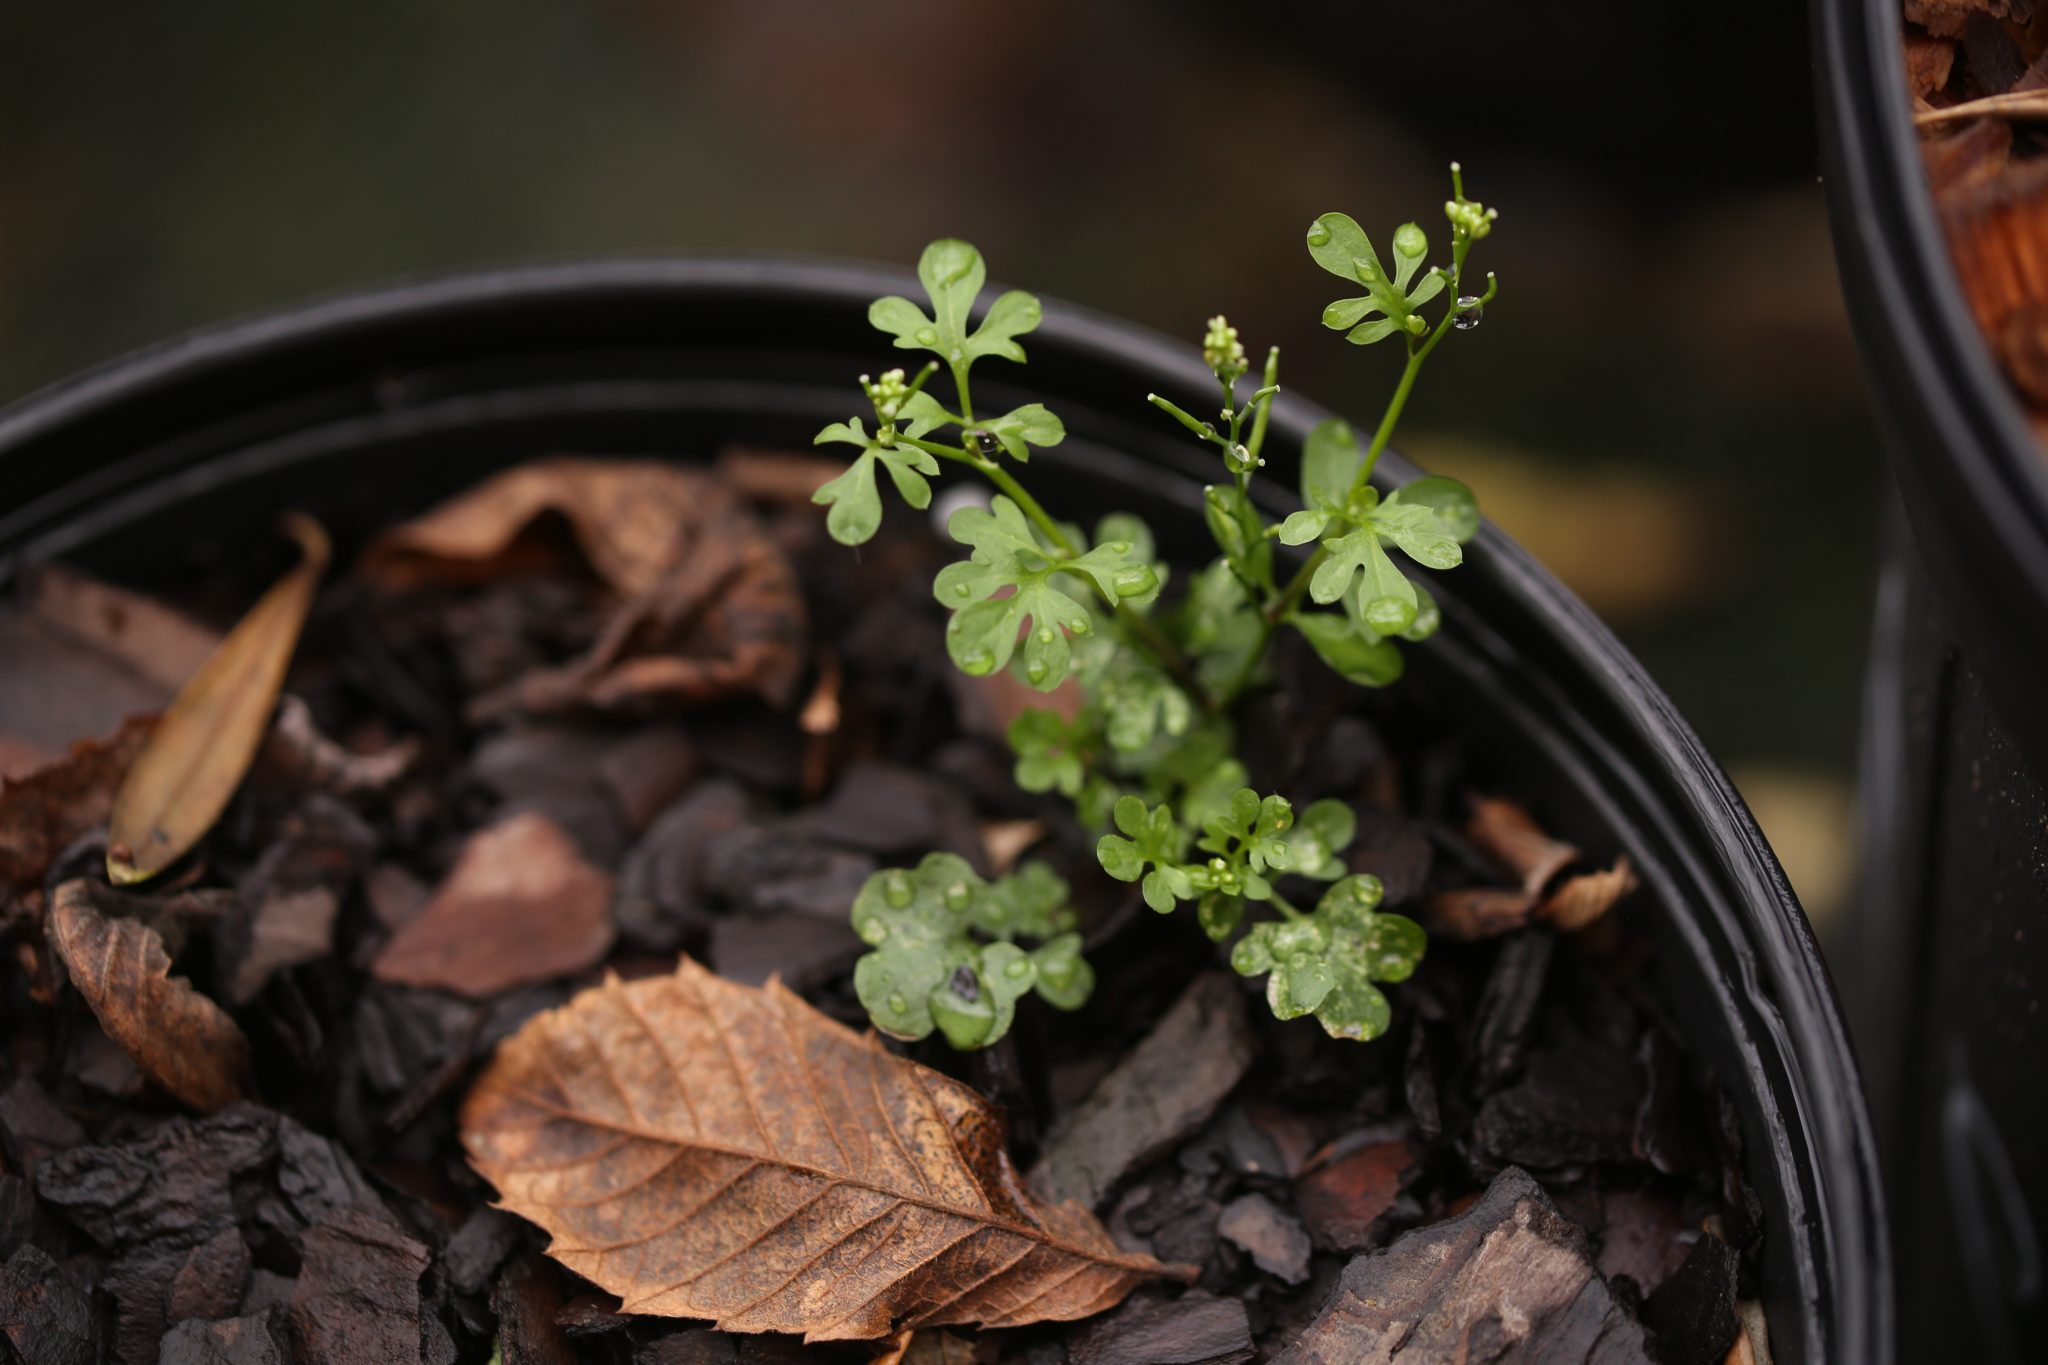 Figure 1. Bittercress (Cardamine spp.) with seed pods. (Photo credit: John Olive, Ornamental Horticulture Research Center)